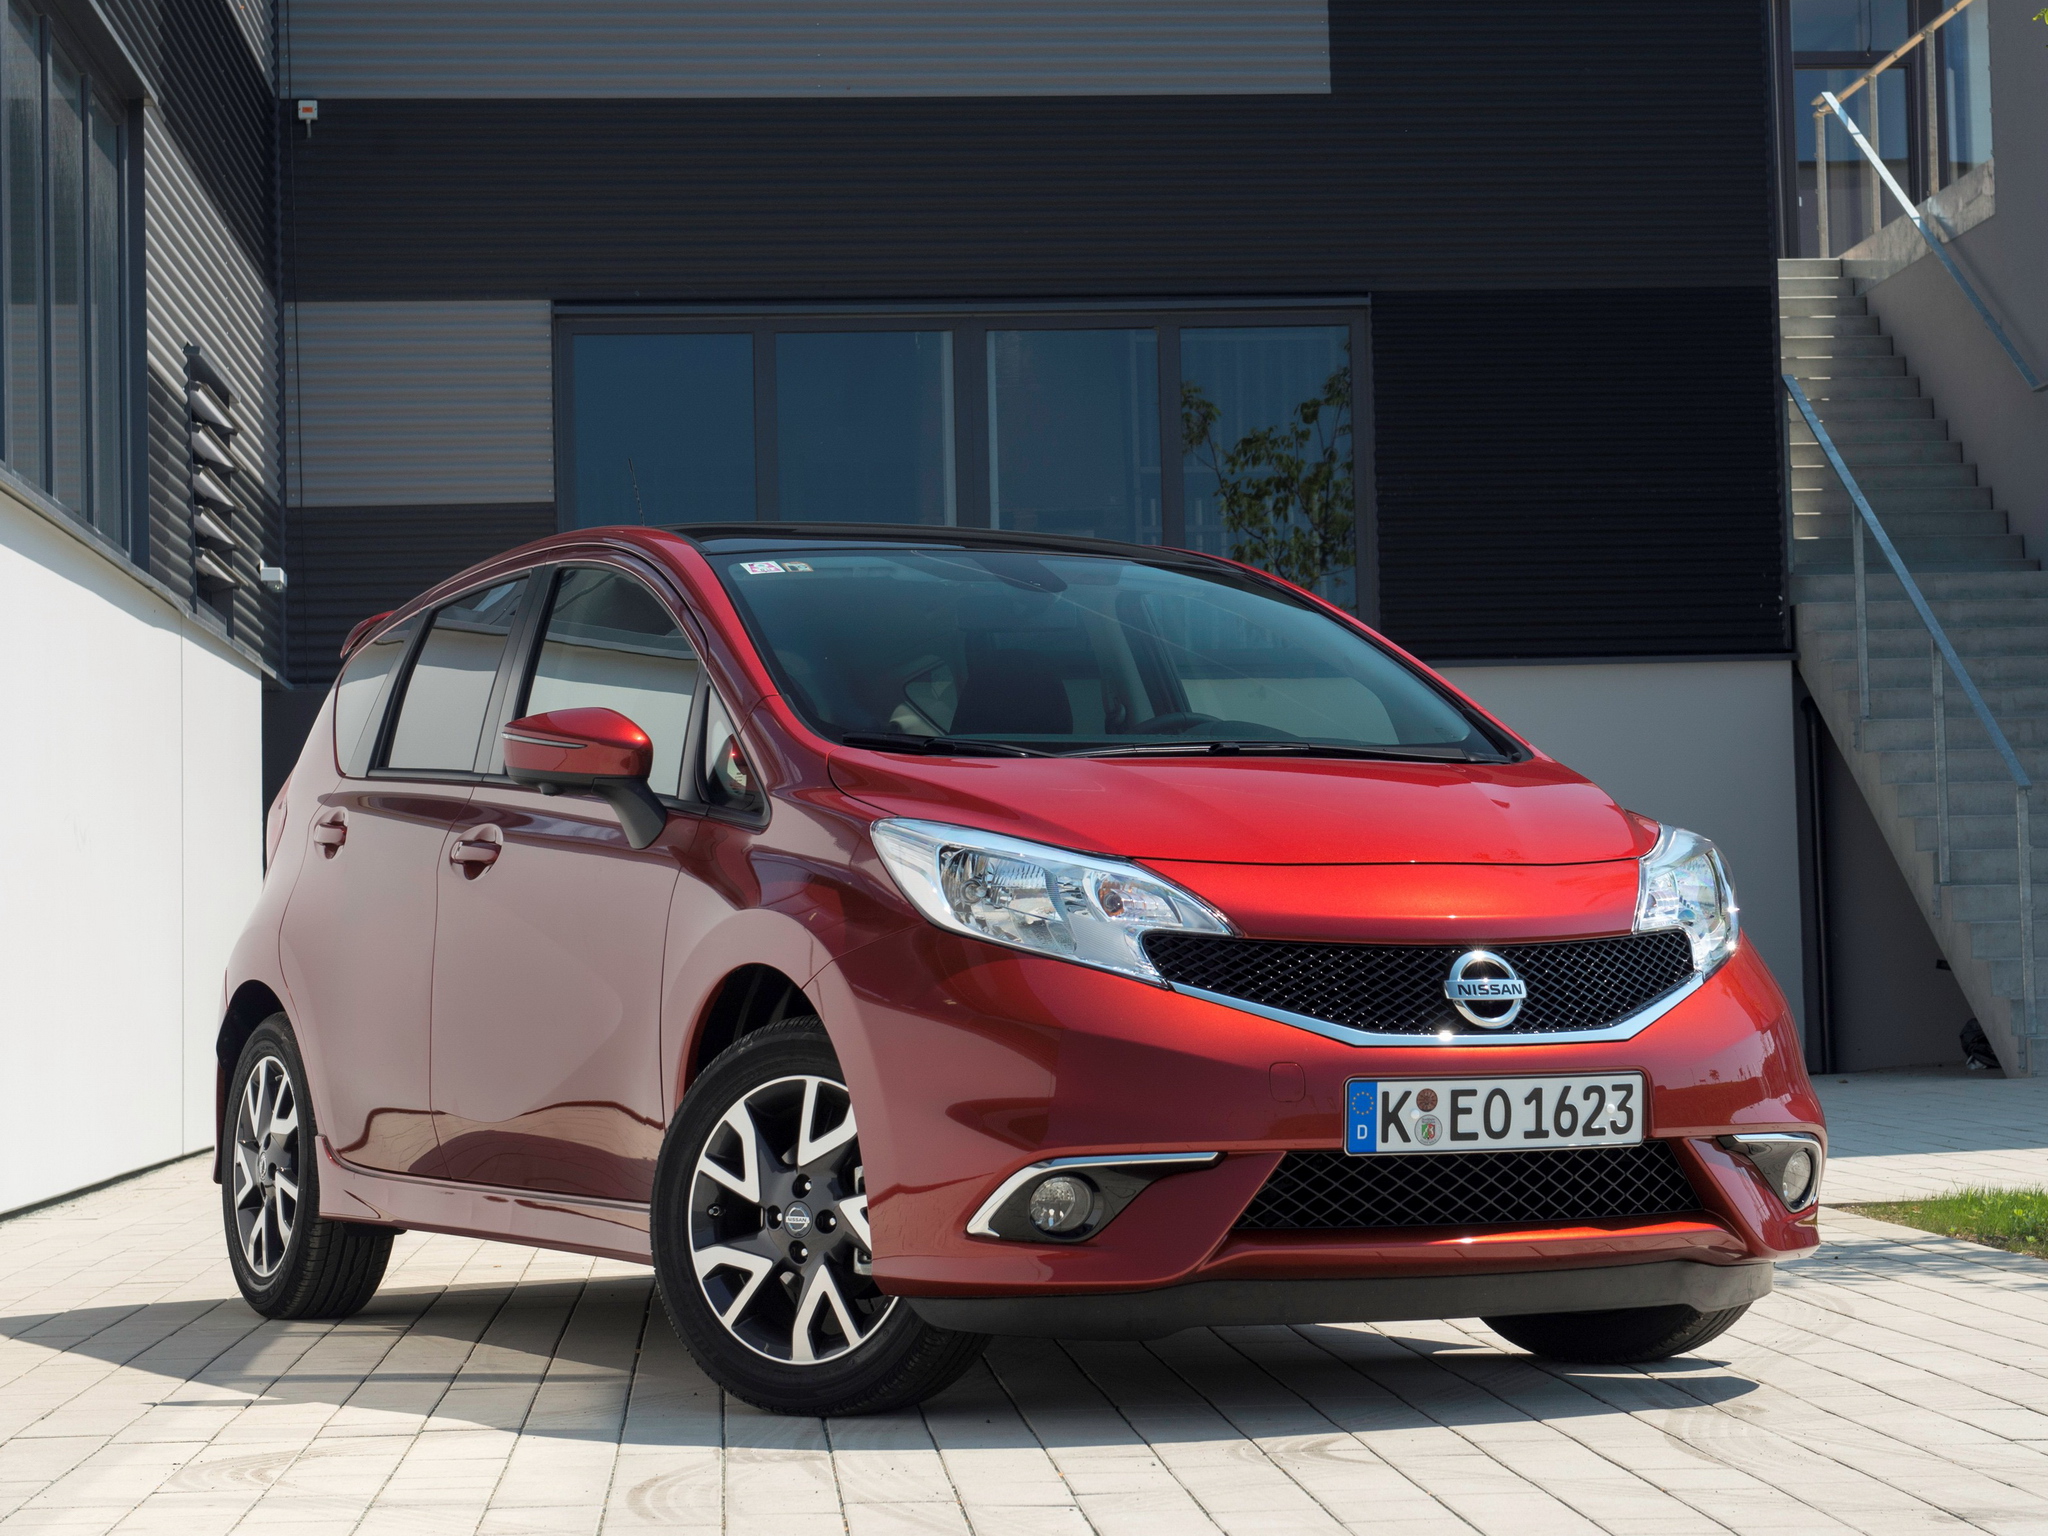 Nissan note photo gallery #3